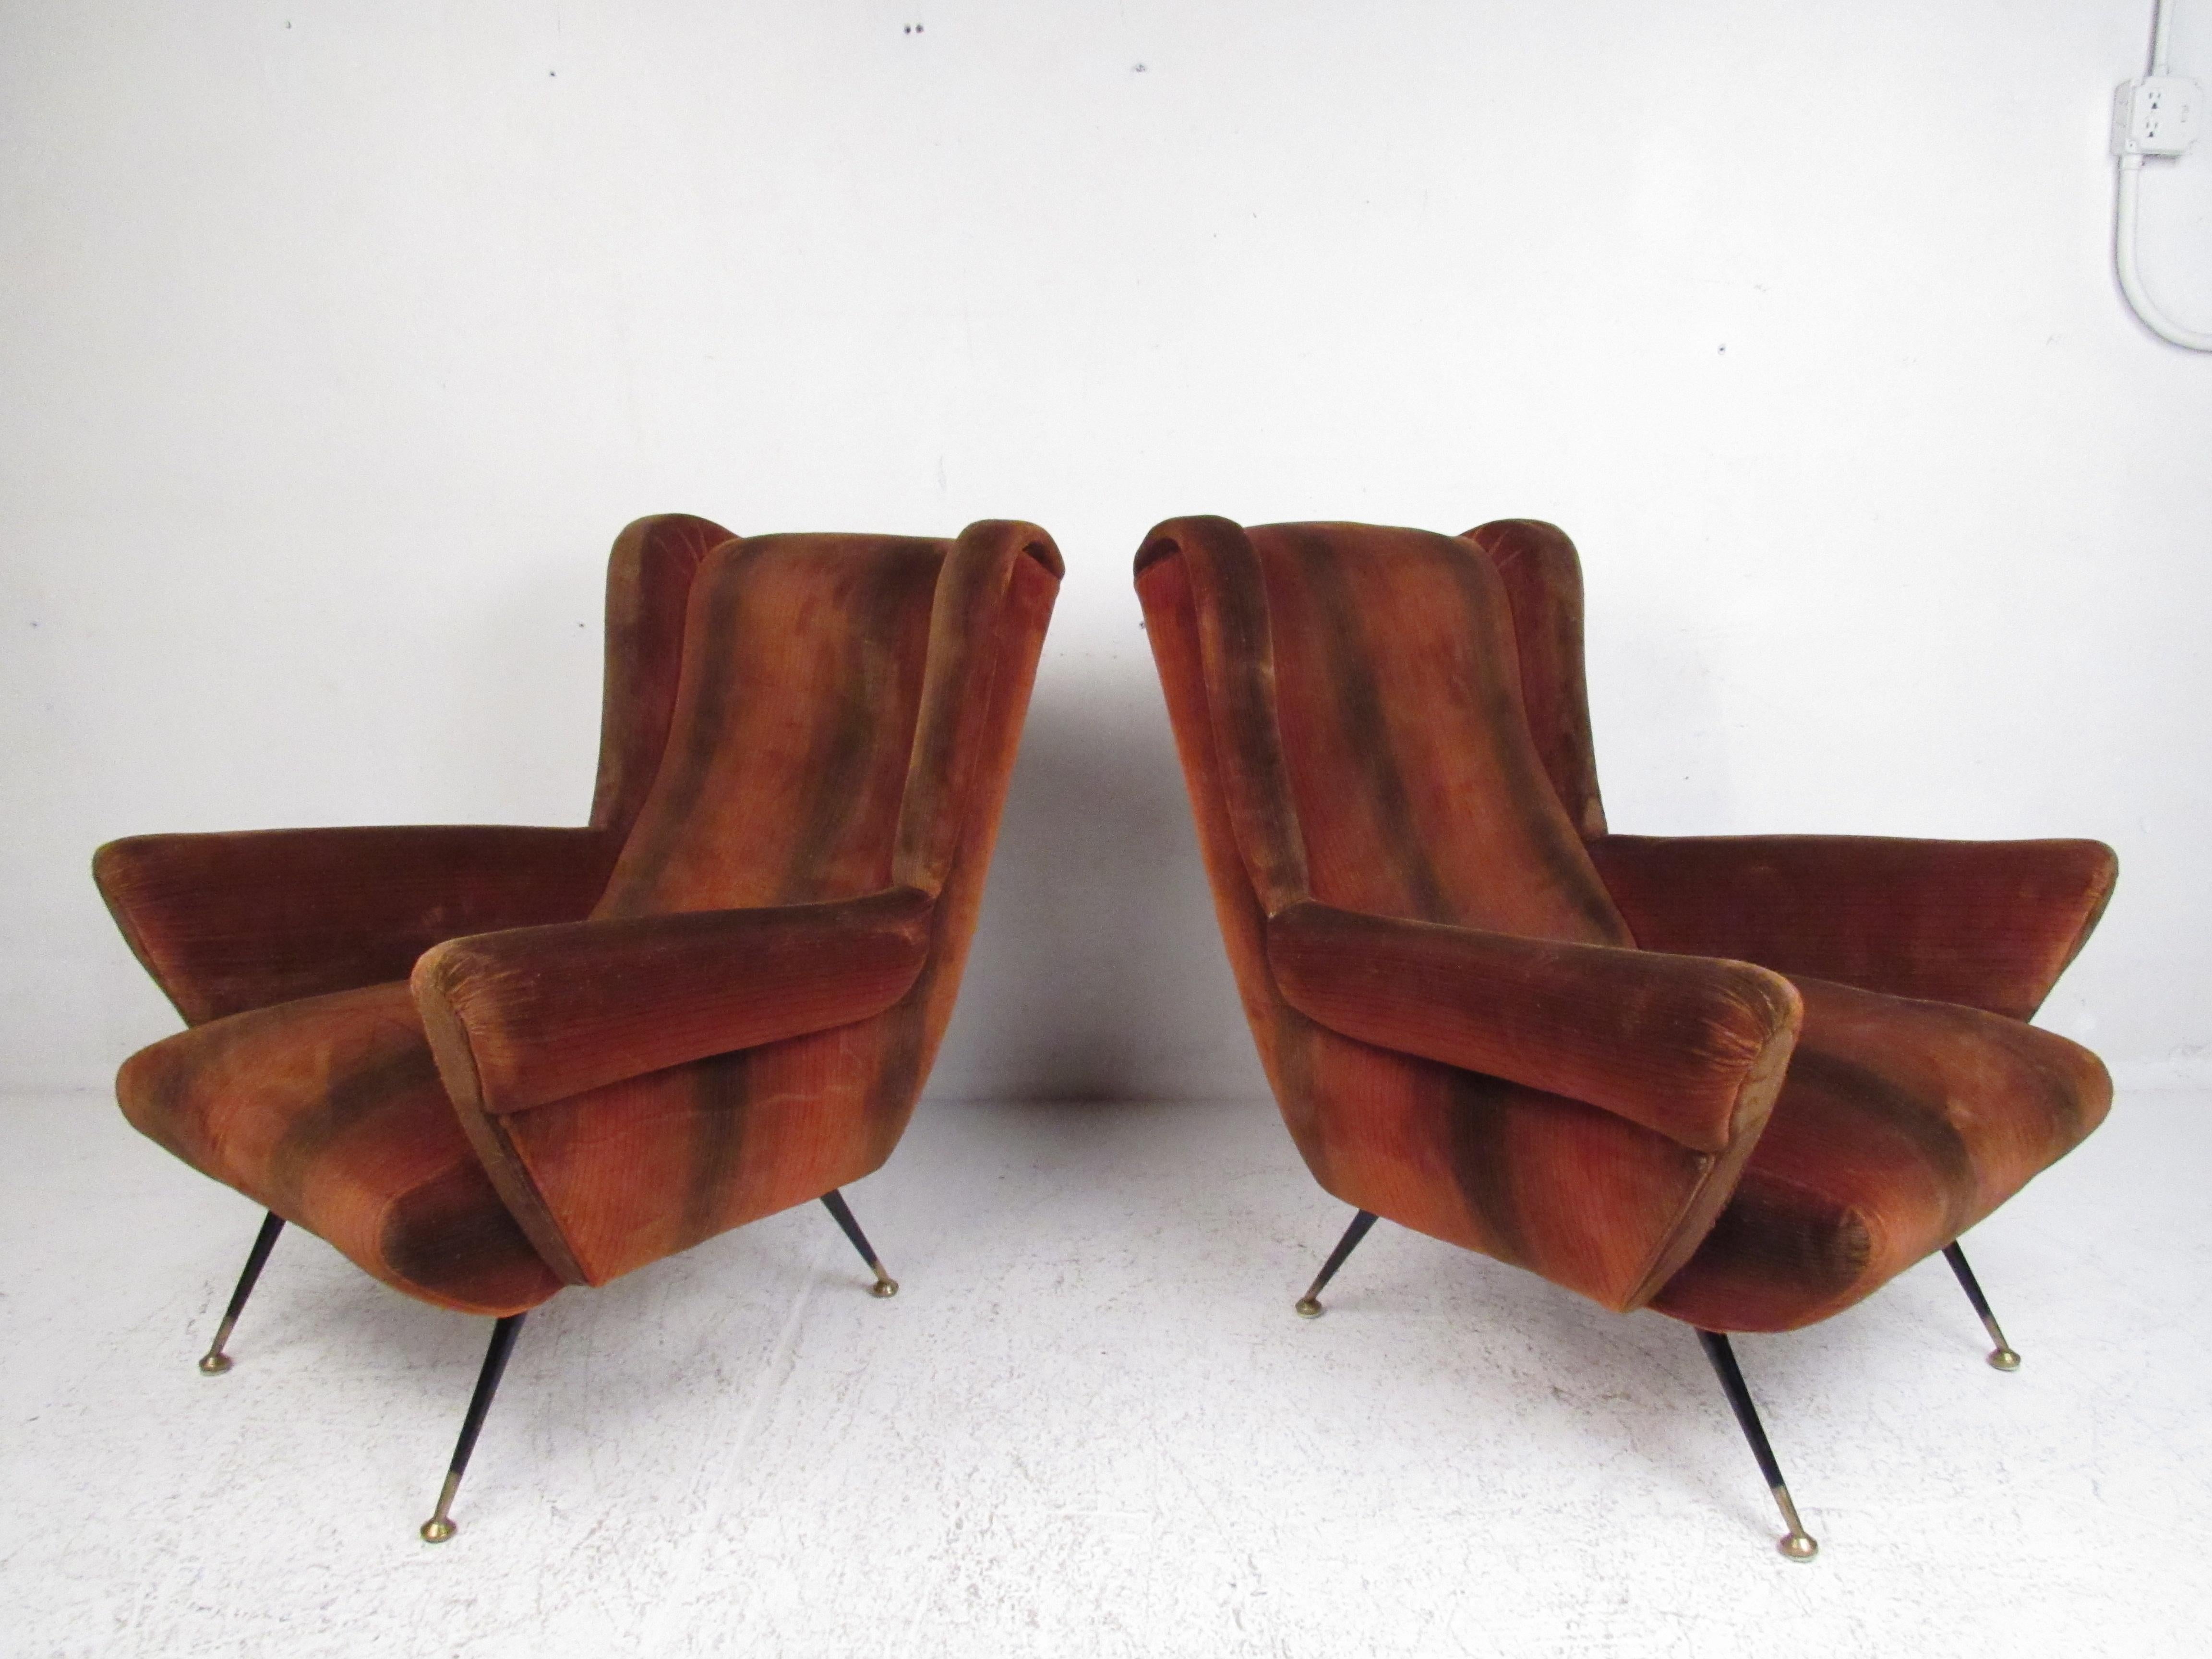 This beautiful pair of vintage modern Italian lounge chairs boast winged backrests and armrests ensuring maximum comfort. The splayed metal legs have brass feet showing quality craftsmanship. A sleek design that is sure to make a lasting impression